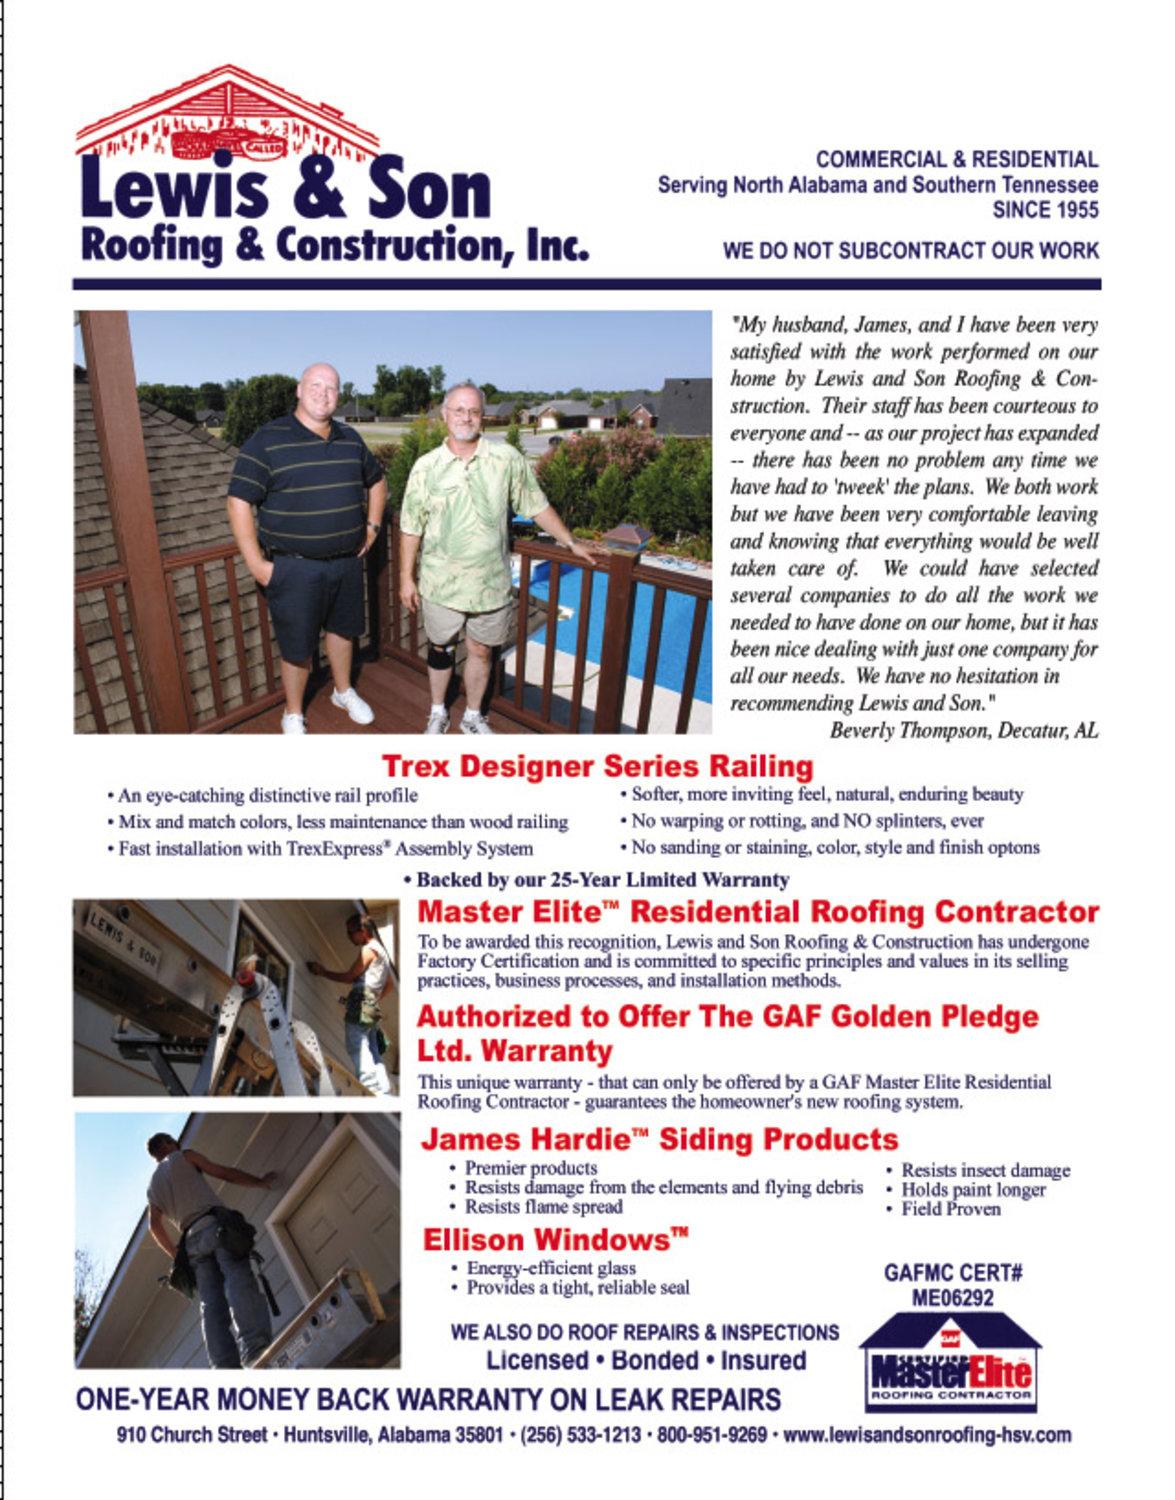 Lewis and Son Roofing Images